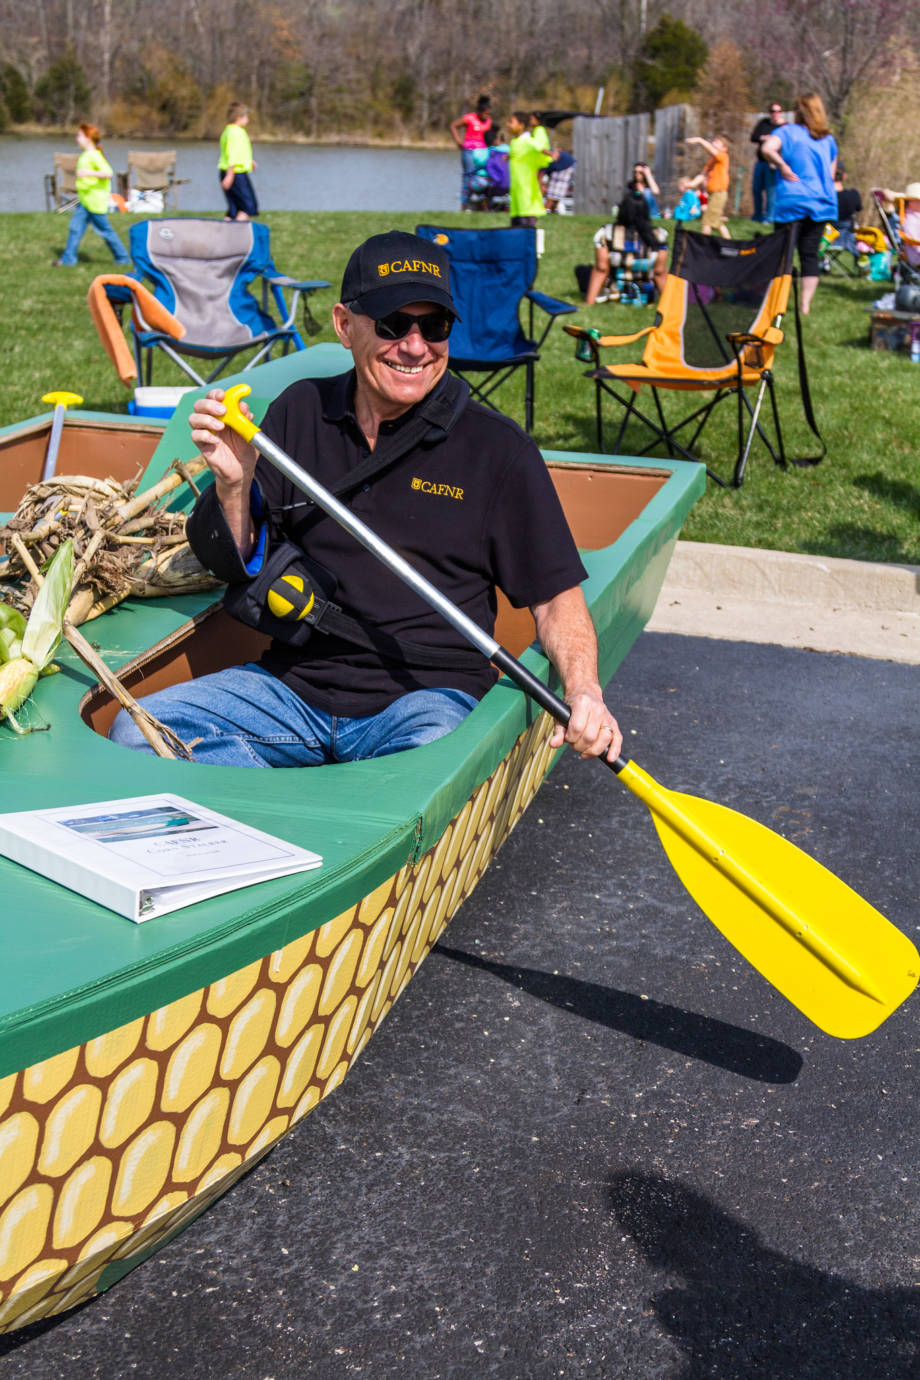 CAFNR Dean Tom Payne shows off CAFNR's submission, a corn-themed vessel, in the 2014 edition of the Float Your Boat for the Food Bank event at Bass Pro Shops Lake. Photo by Aaron Duke. 